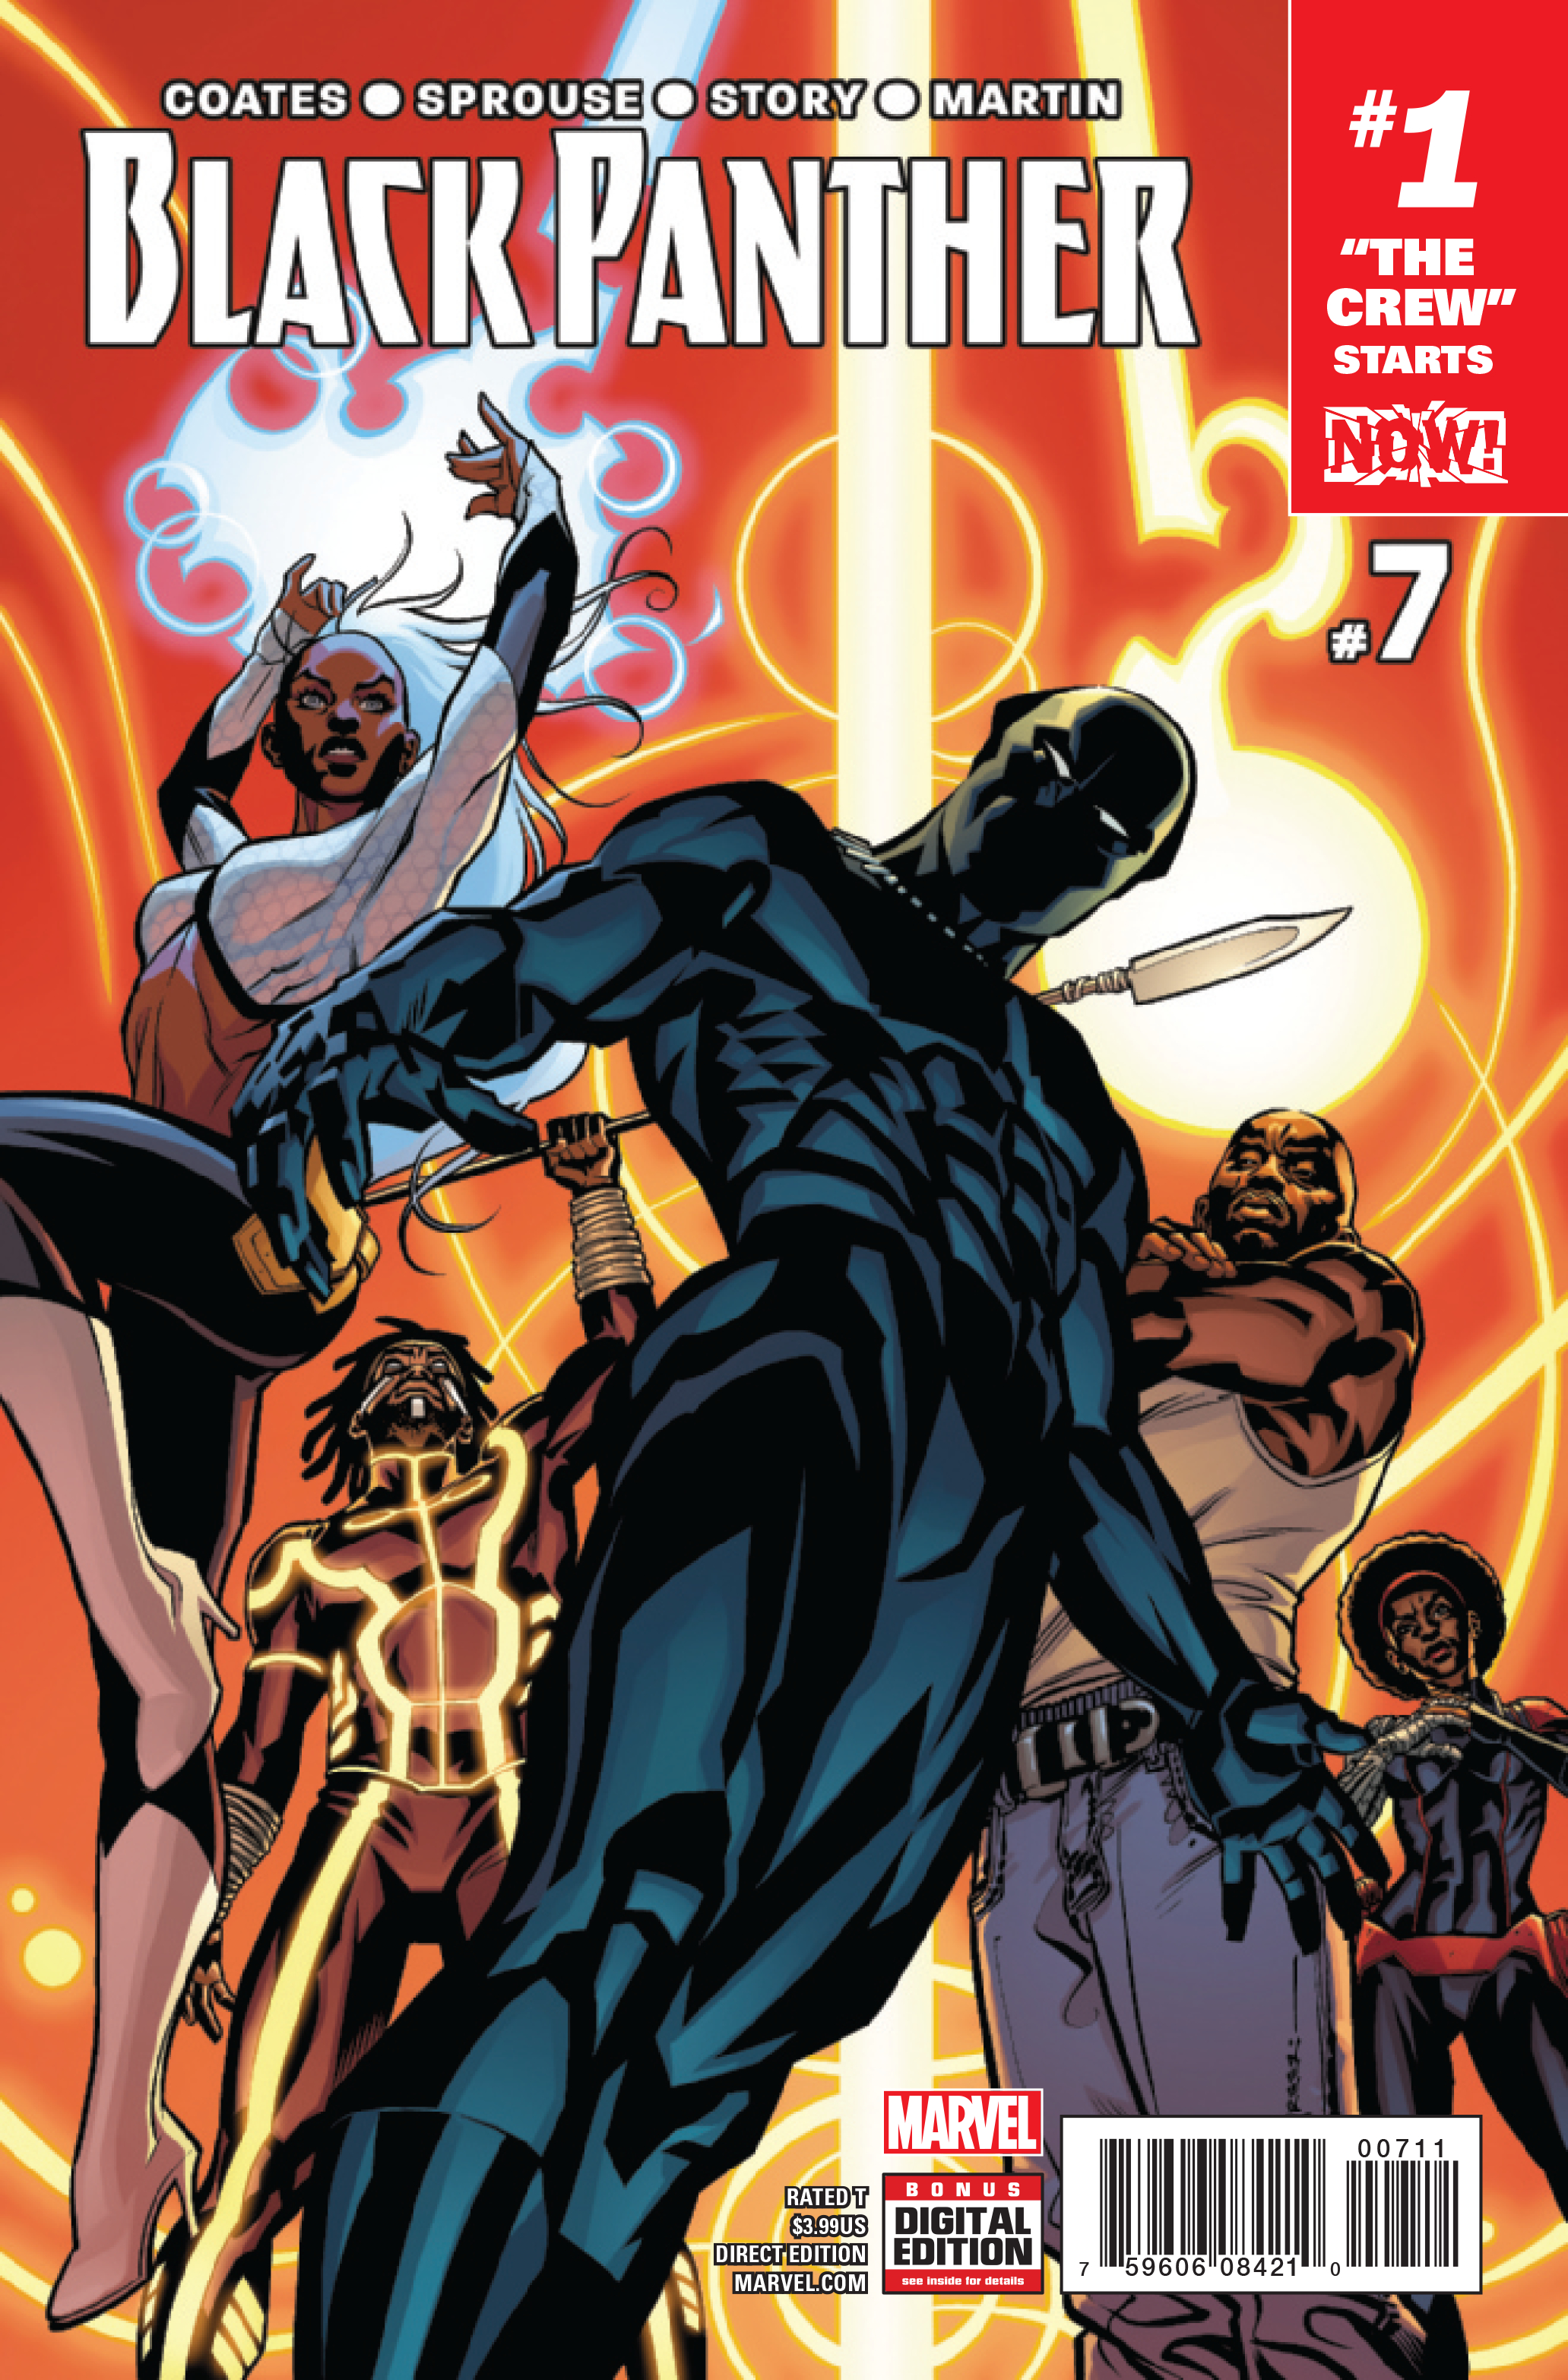 BLACK PANTHER #7 NOW